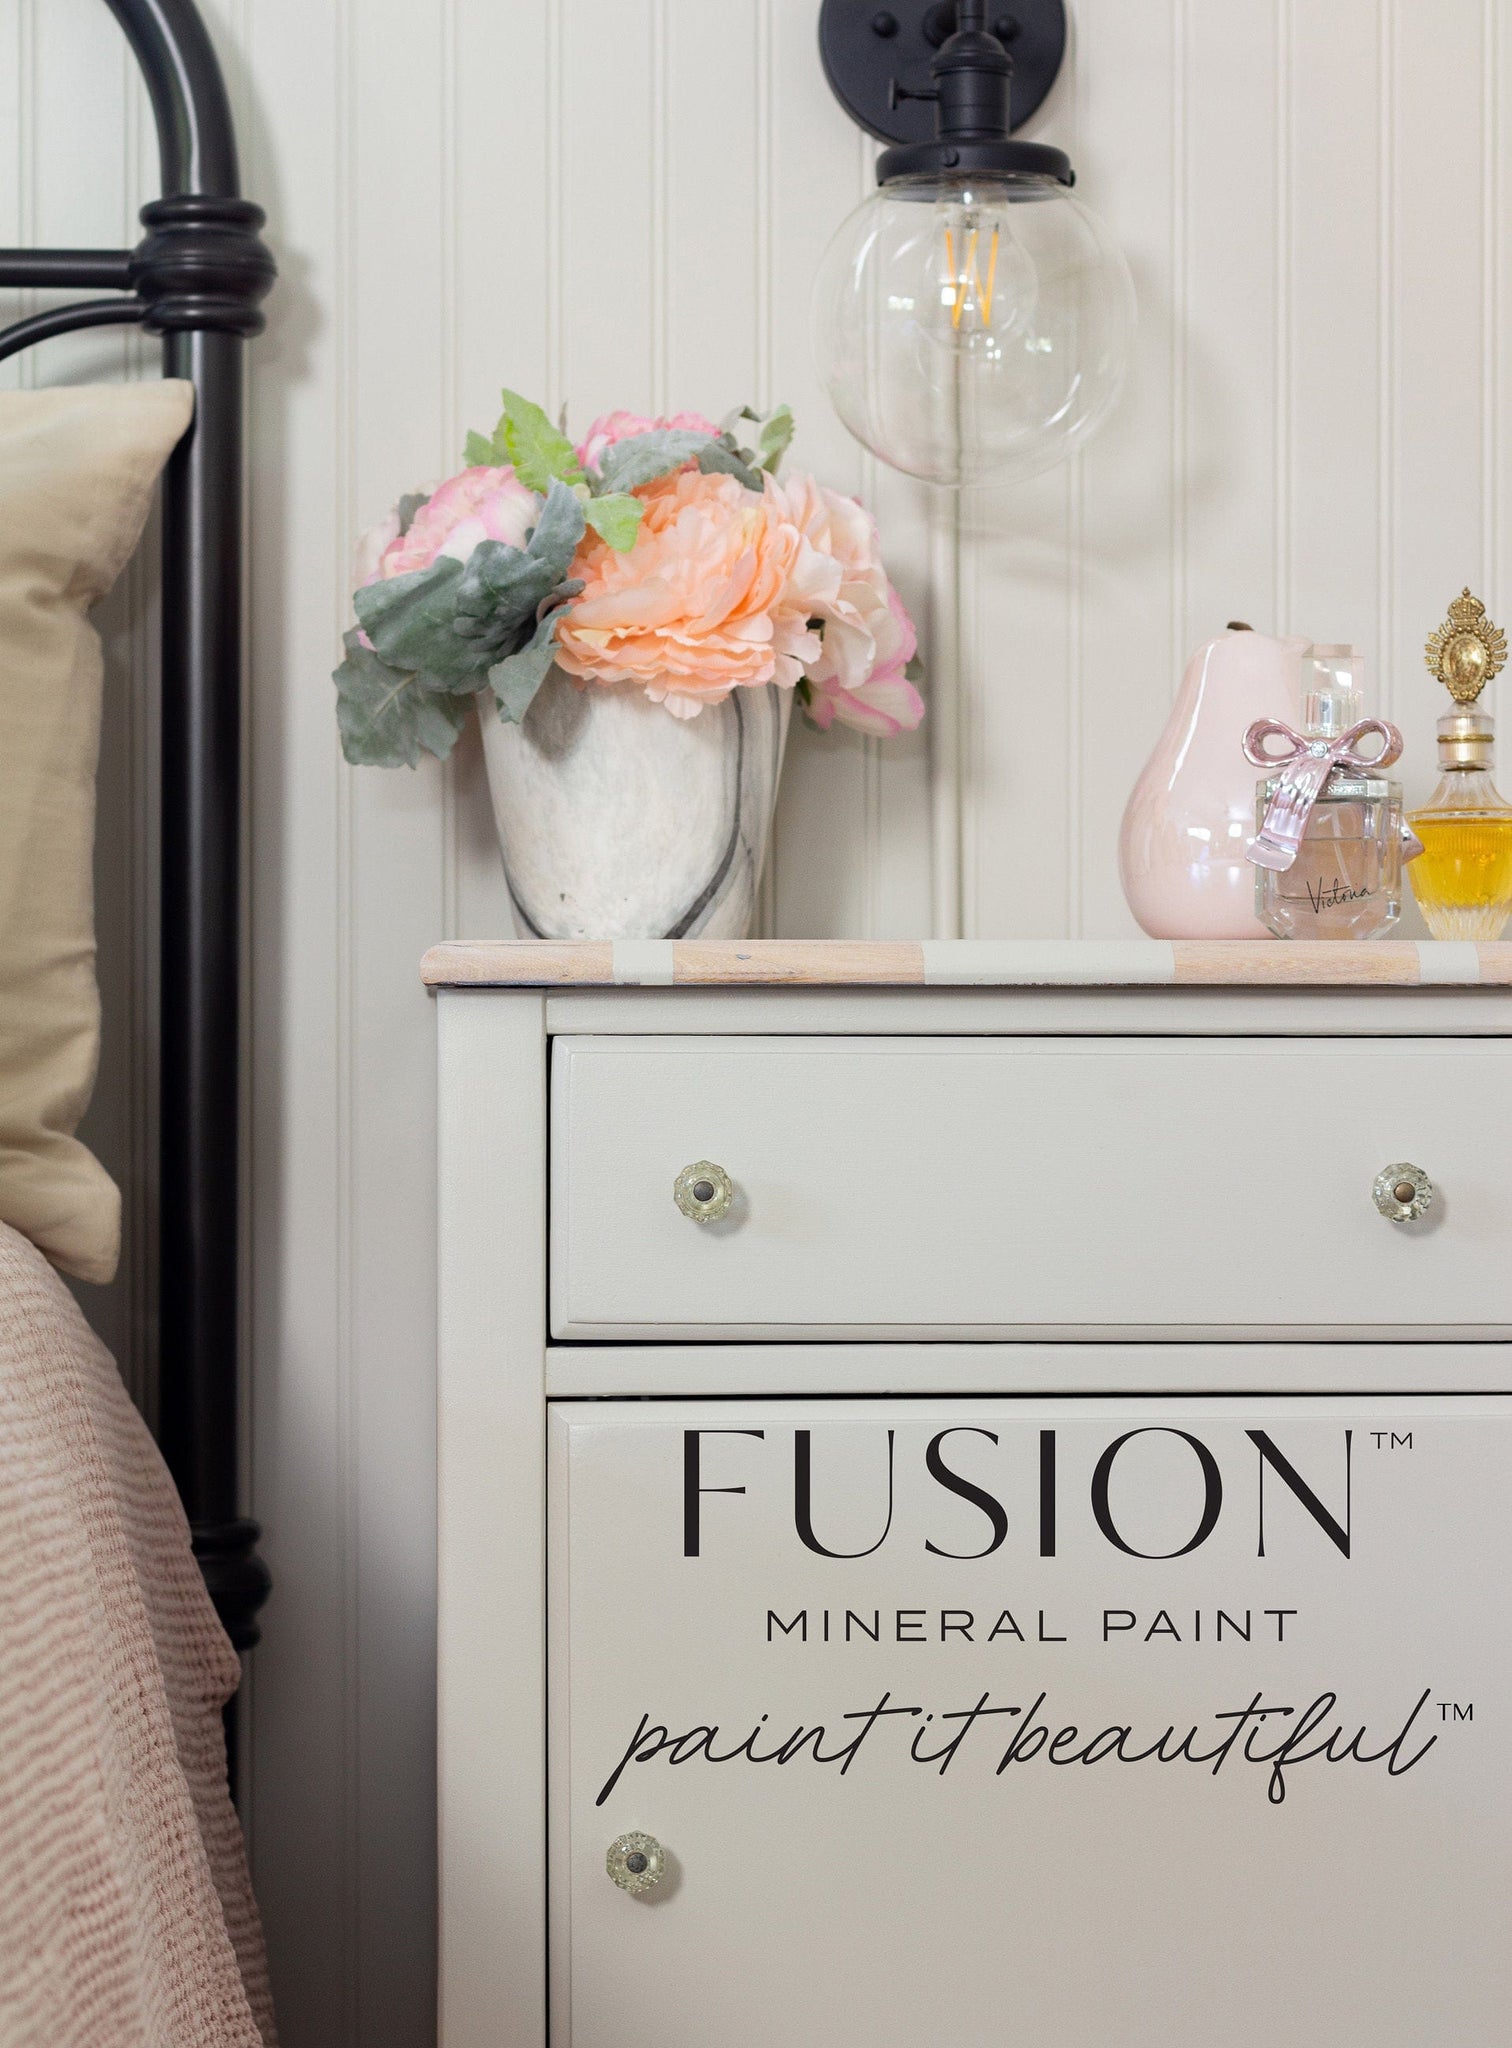 Furniture Makeover Using Fusion Mineral Paint • Neat House. Sweet Home®